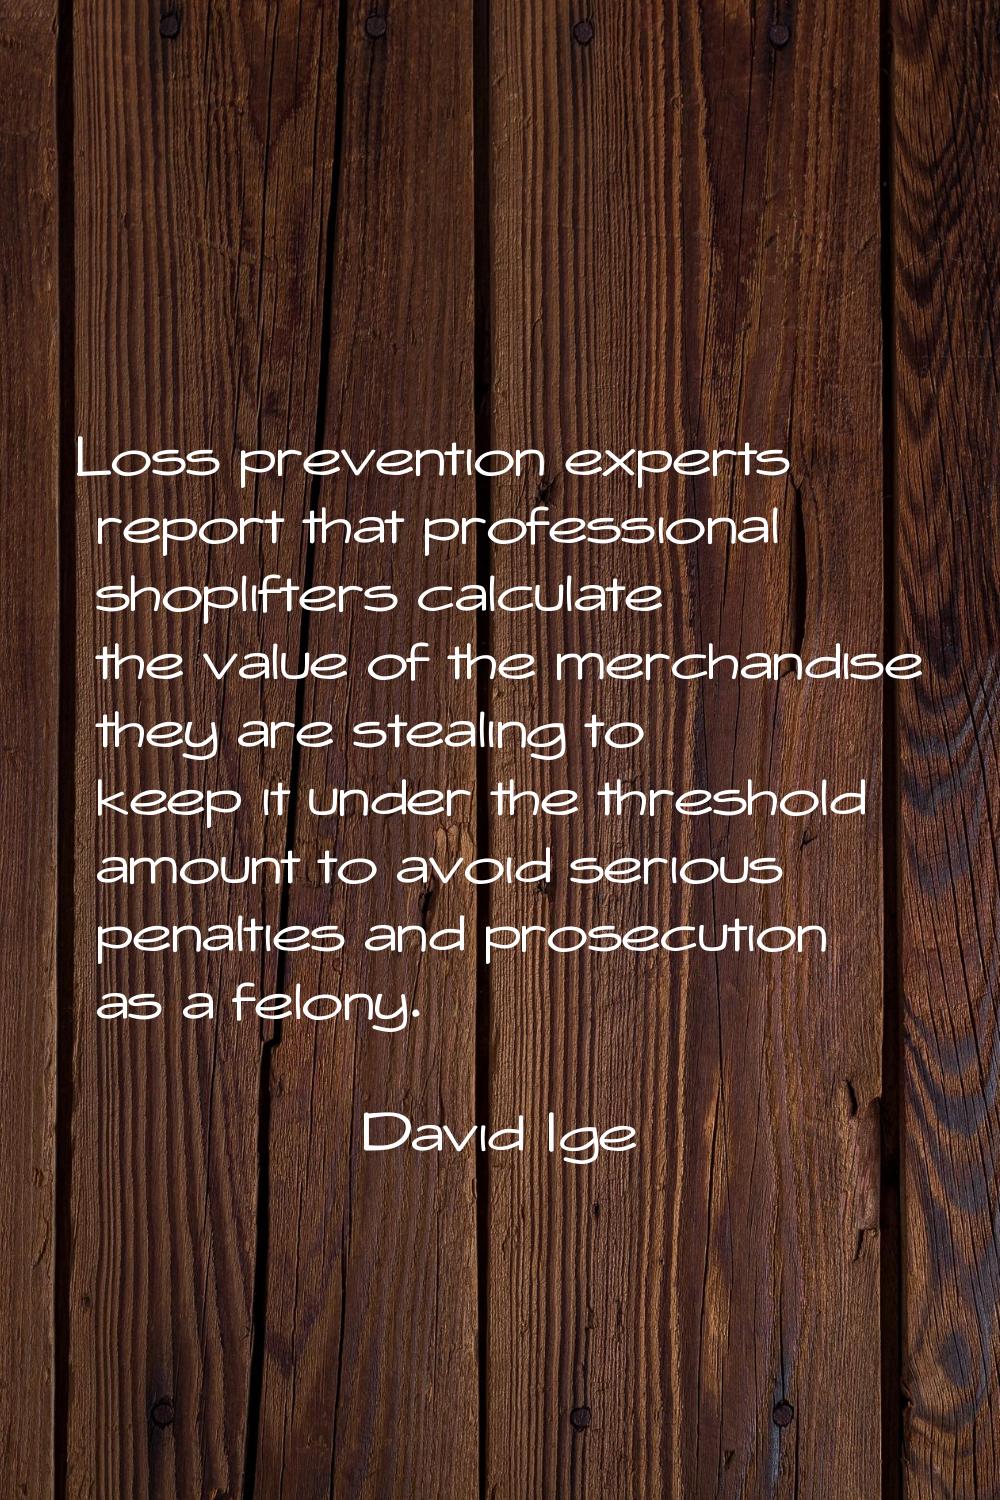 Loss prevention experts report that professional shoplifters calculate the value of the merchandise